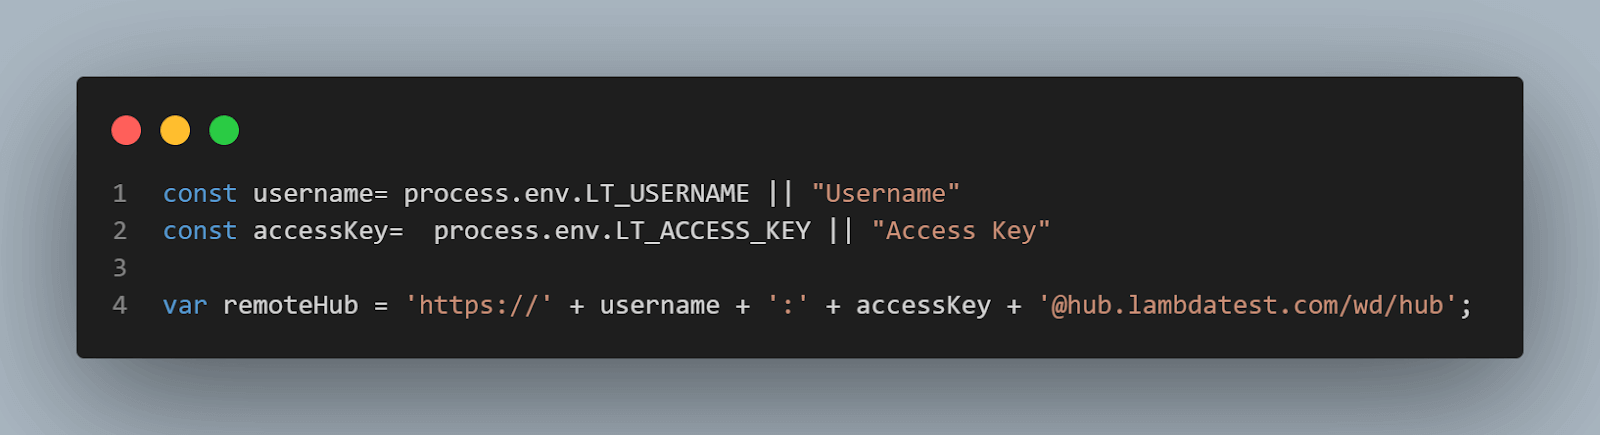 username-accesskey